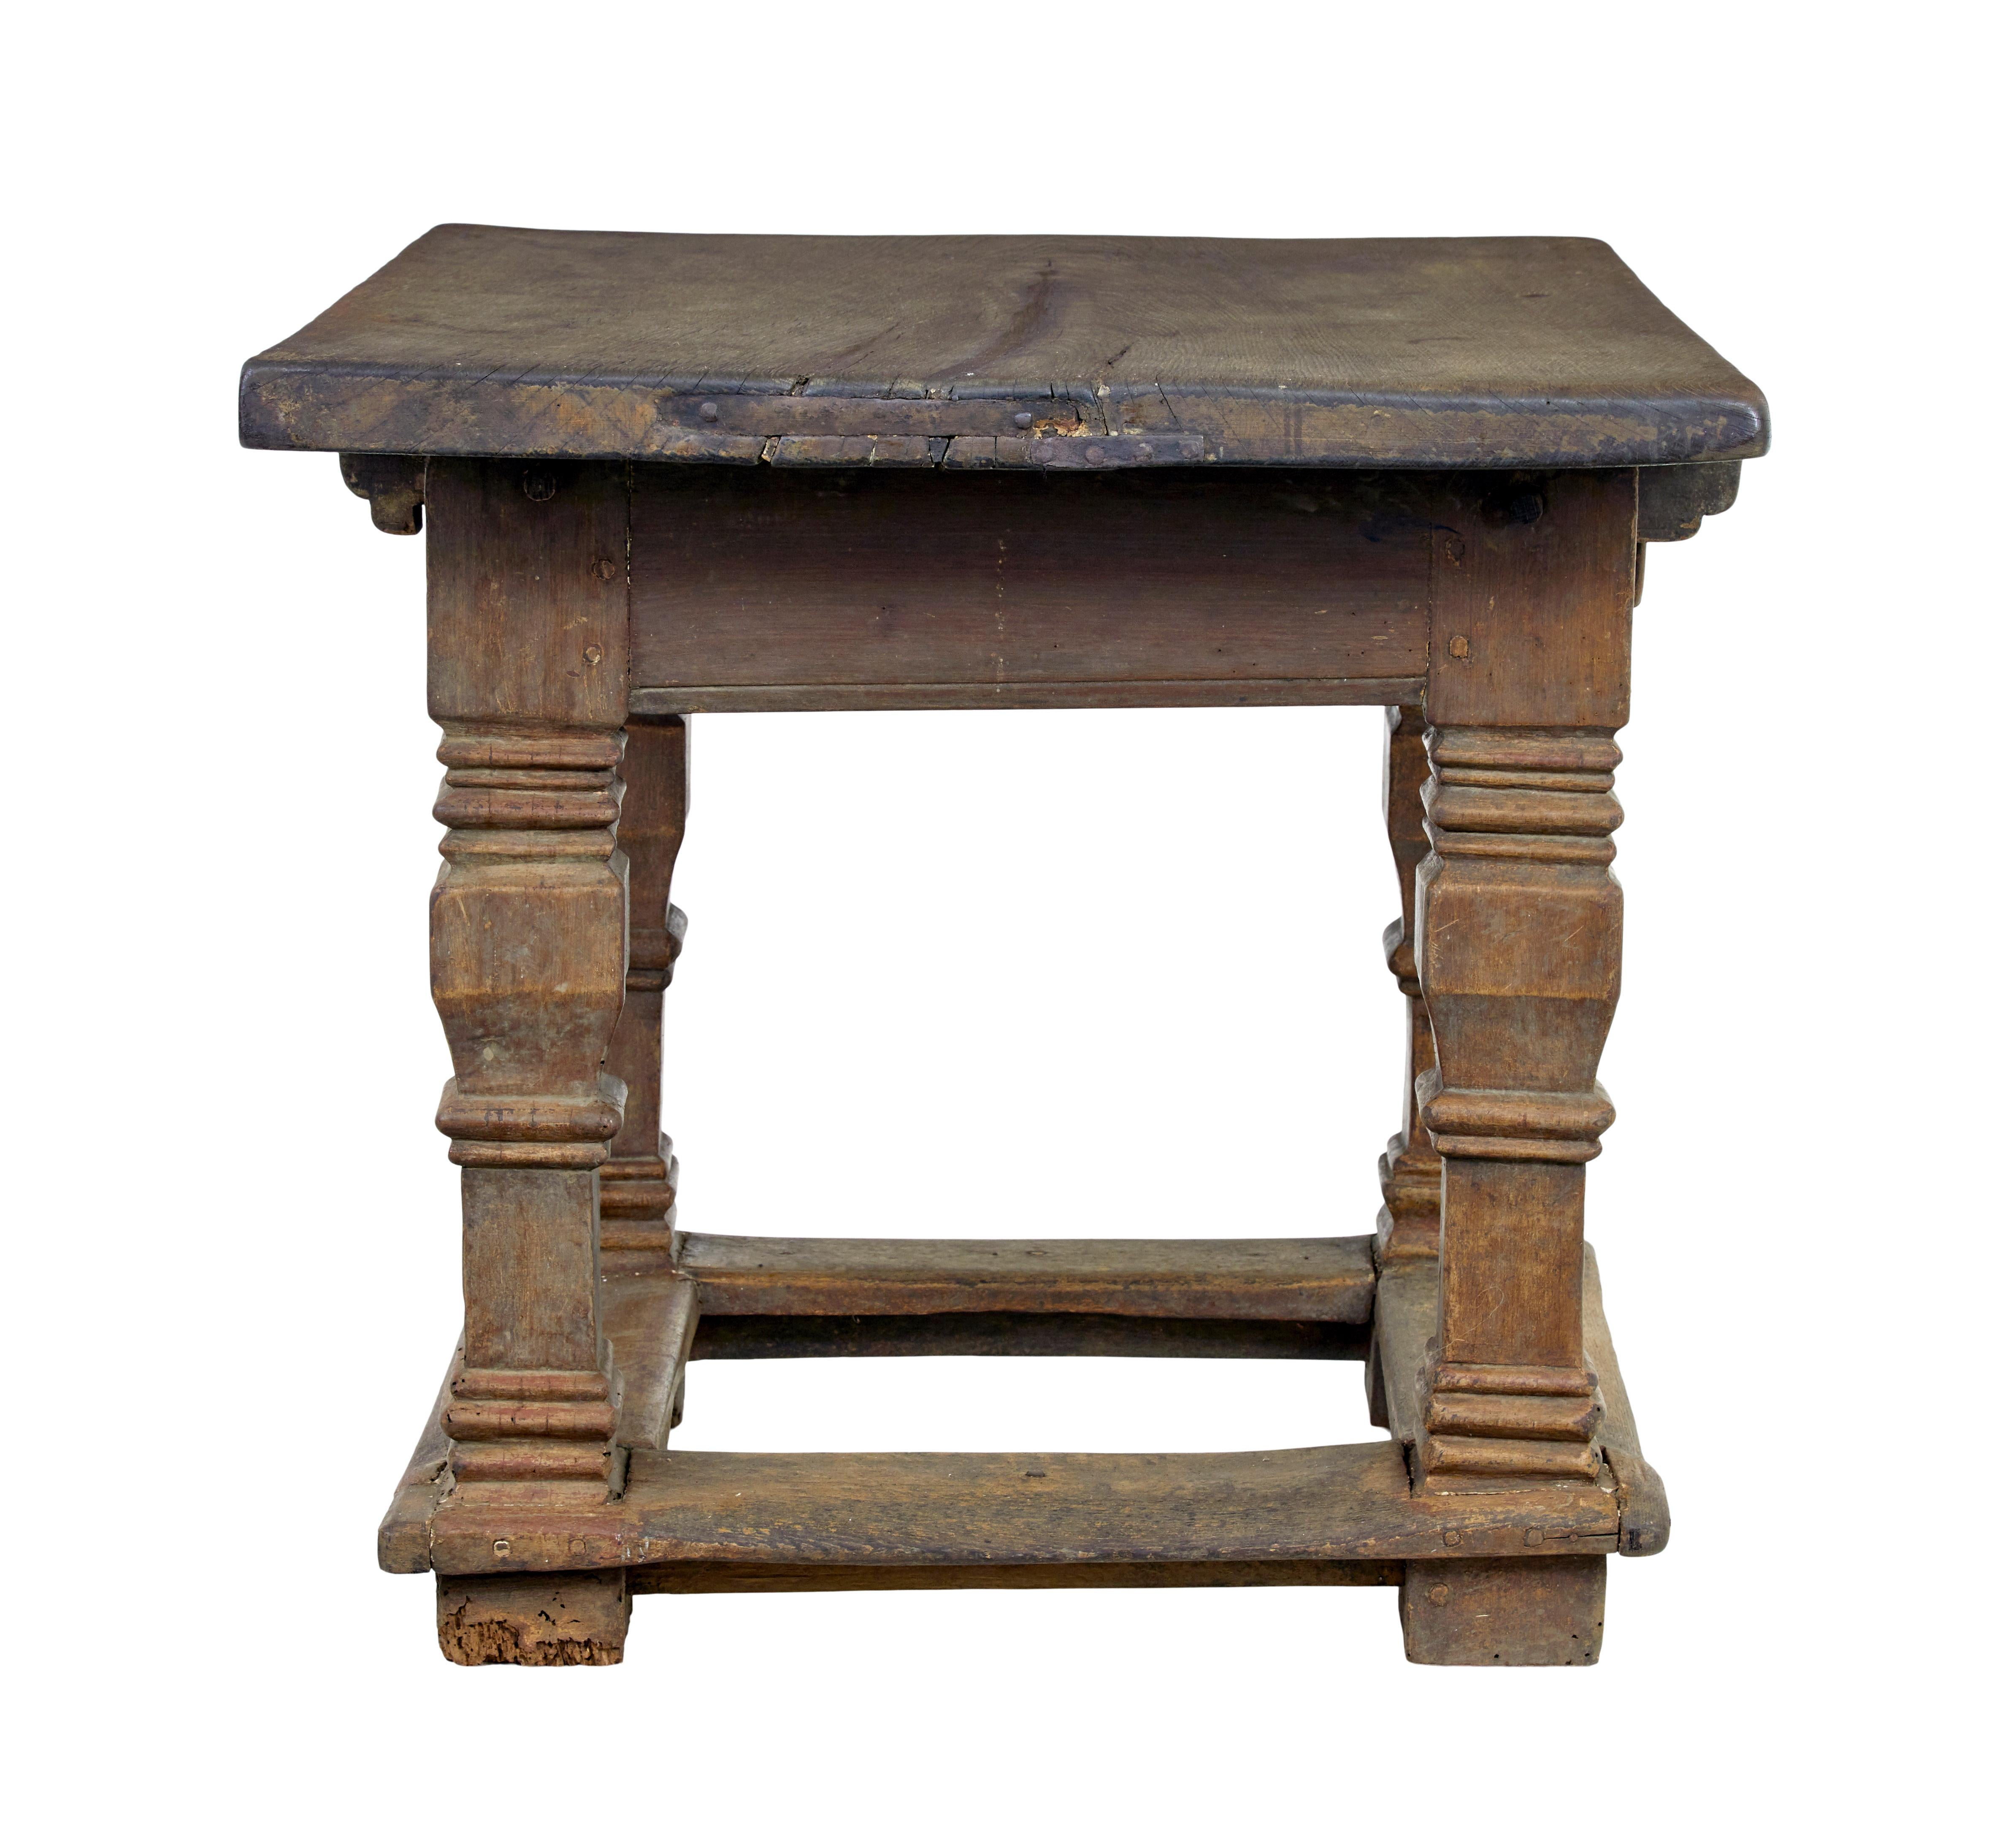 Flemish 17th Century carved oak table For Sale 2